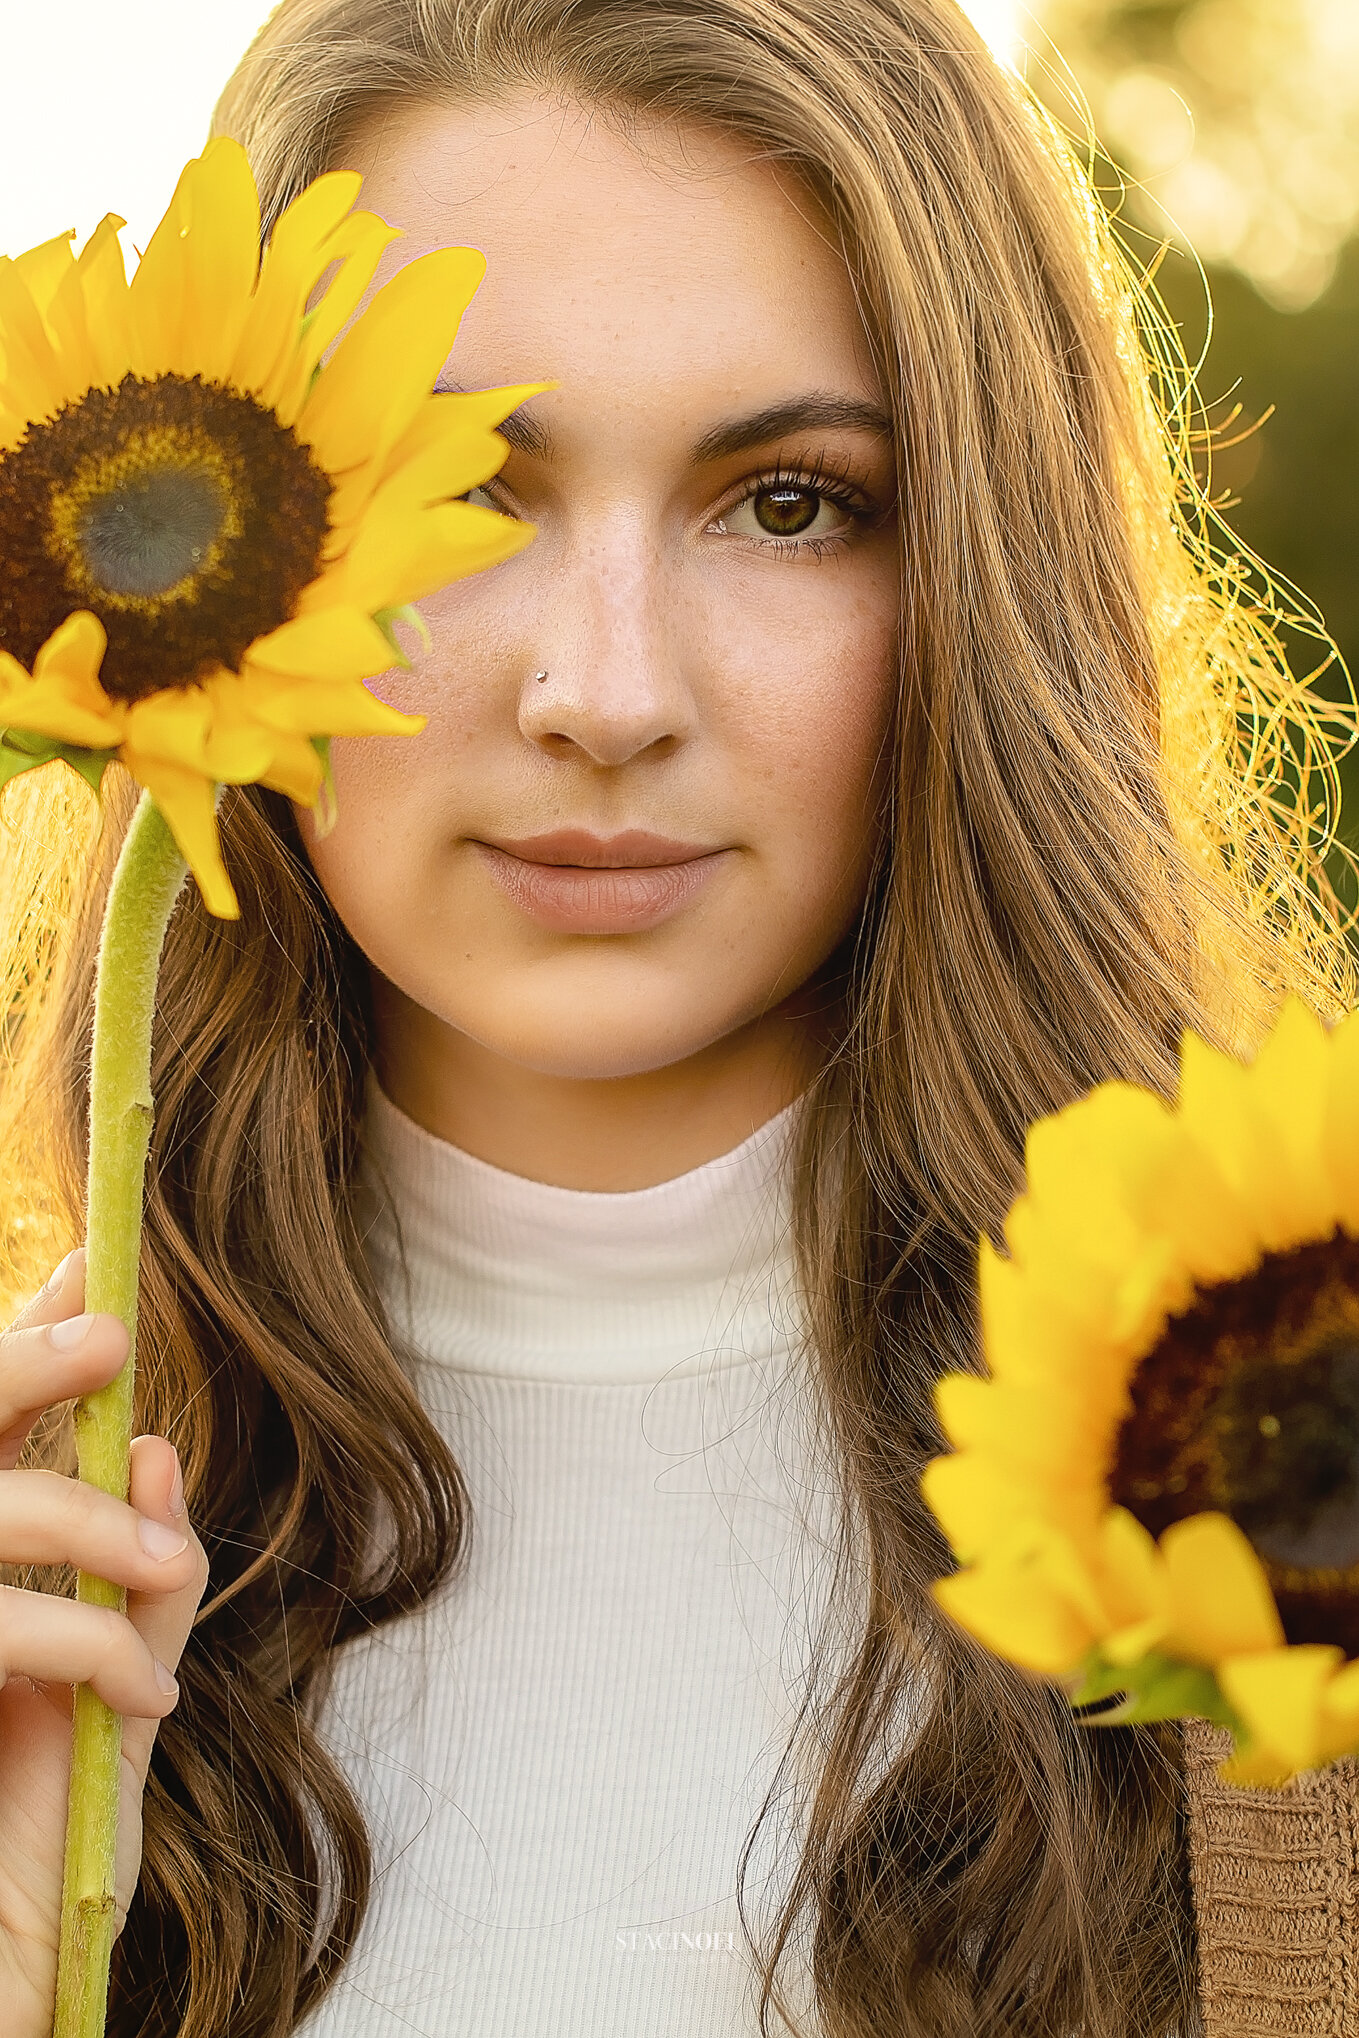  Staci noel photography photographs hickory ridge senior girl for senior portraits outside in natural light in field with tall grass and sunset and sunflowers 